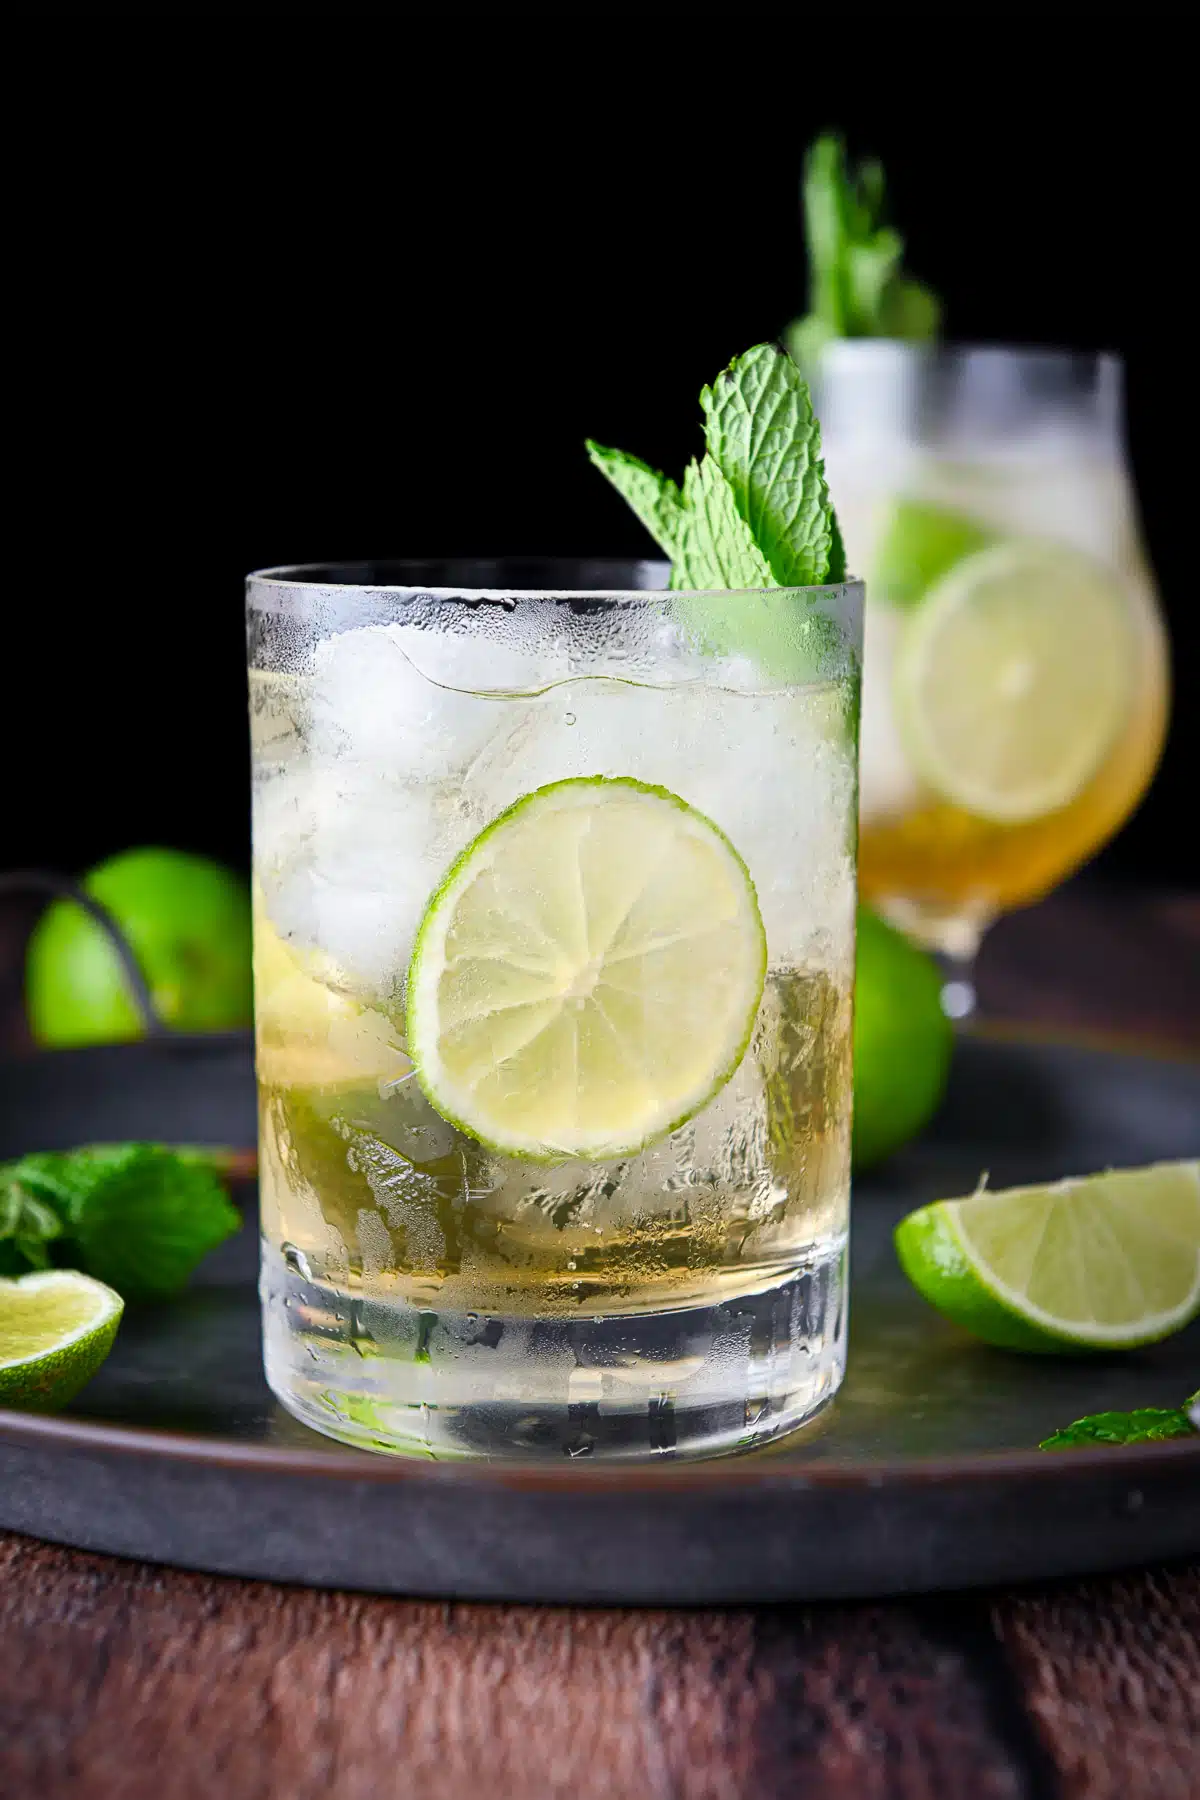 Skinny gin and tonic recipe - only 55 calories